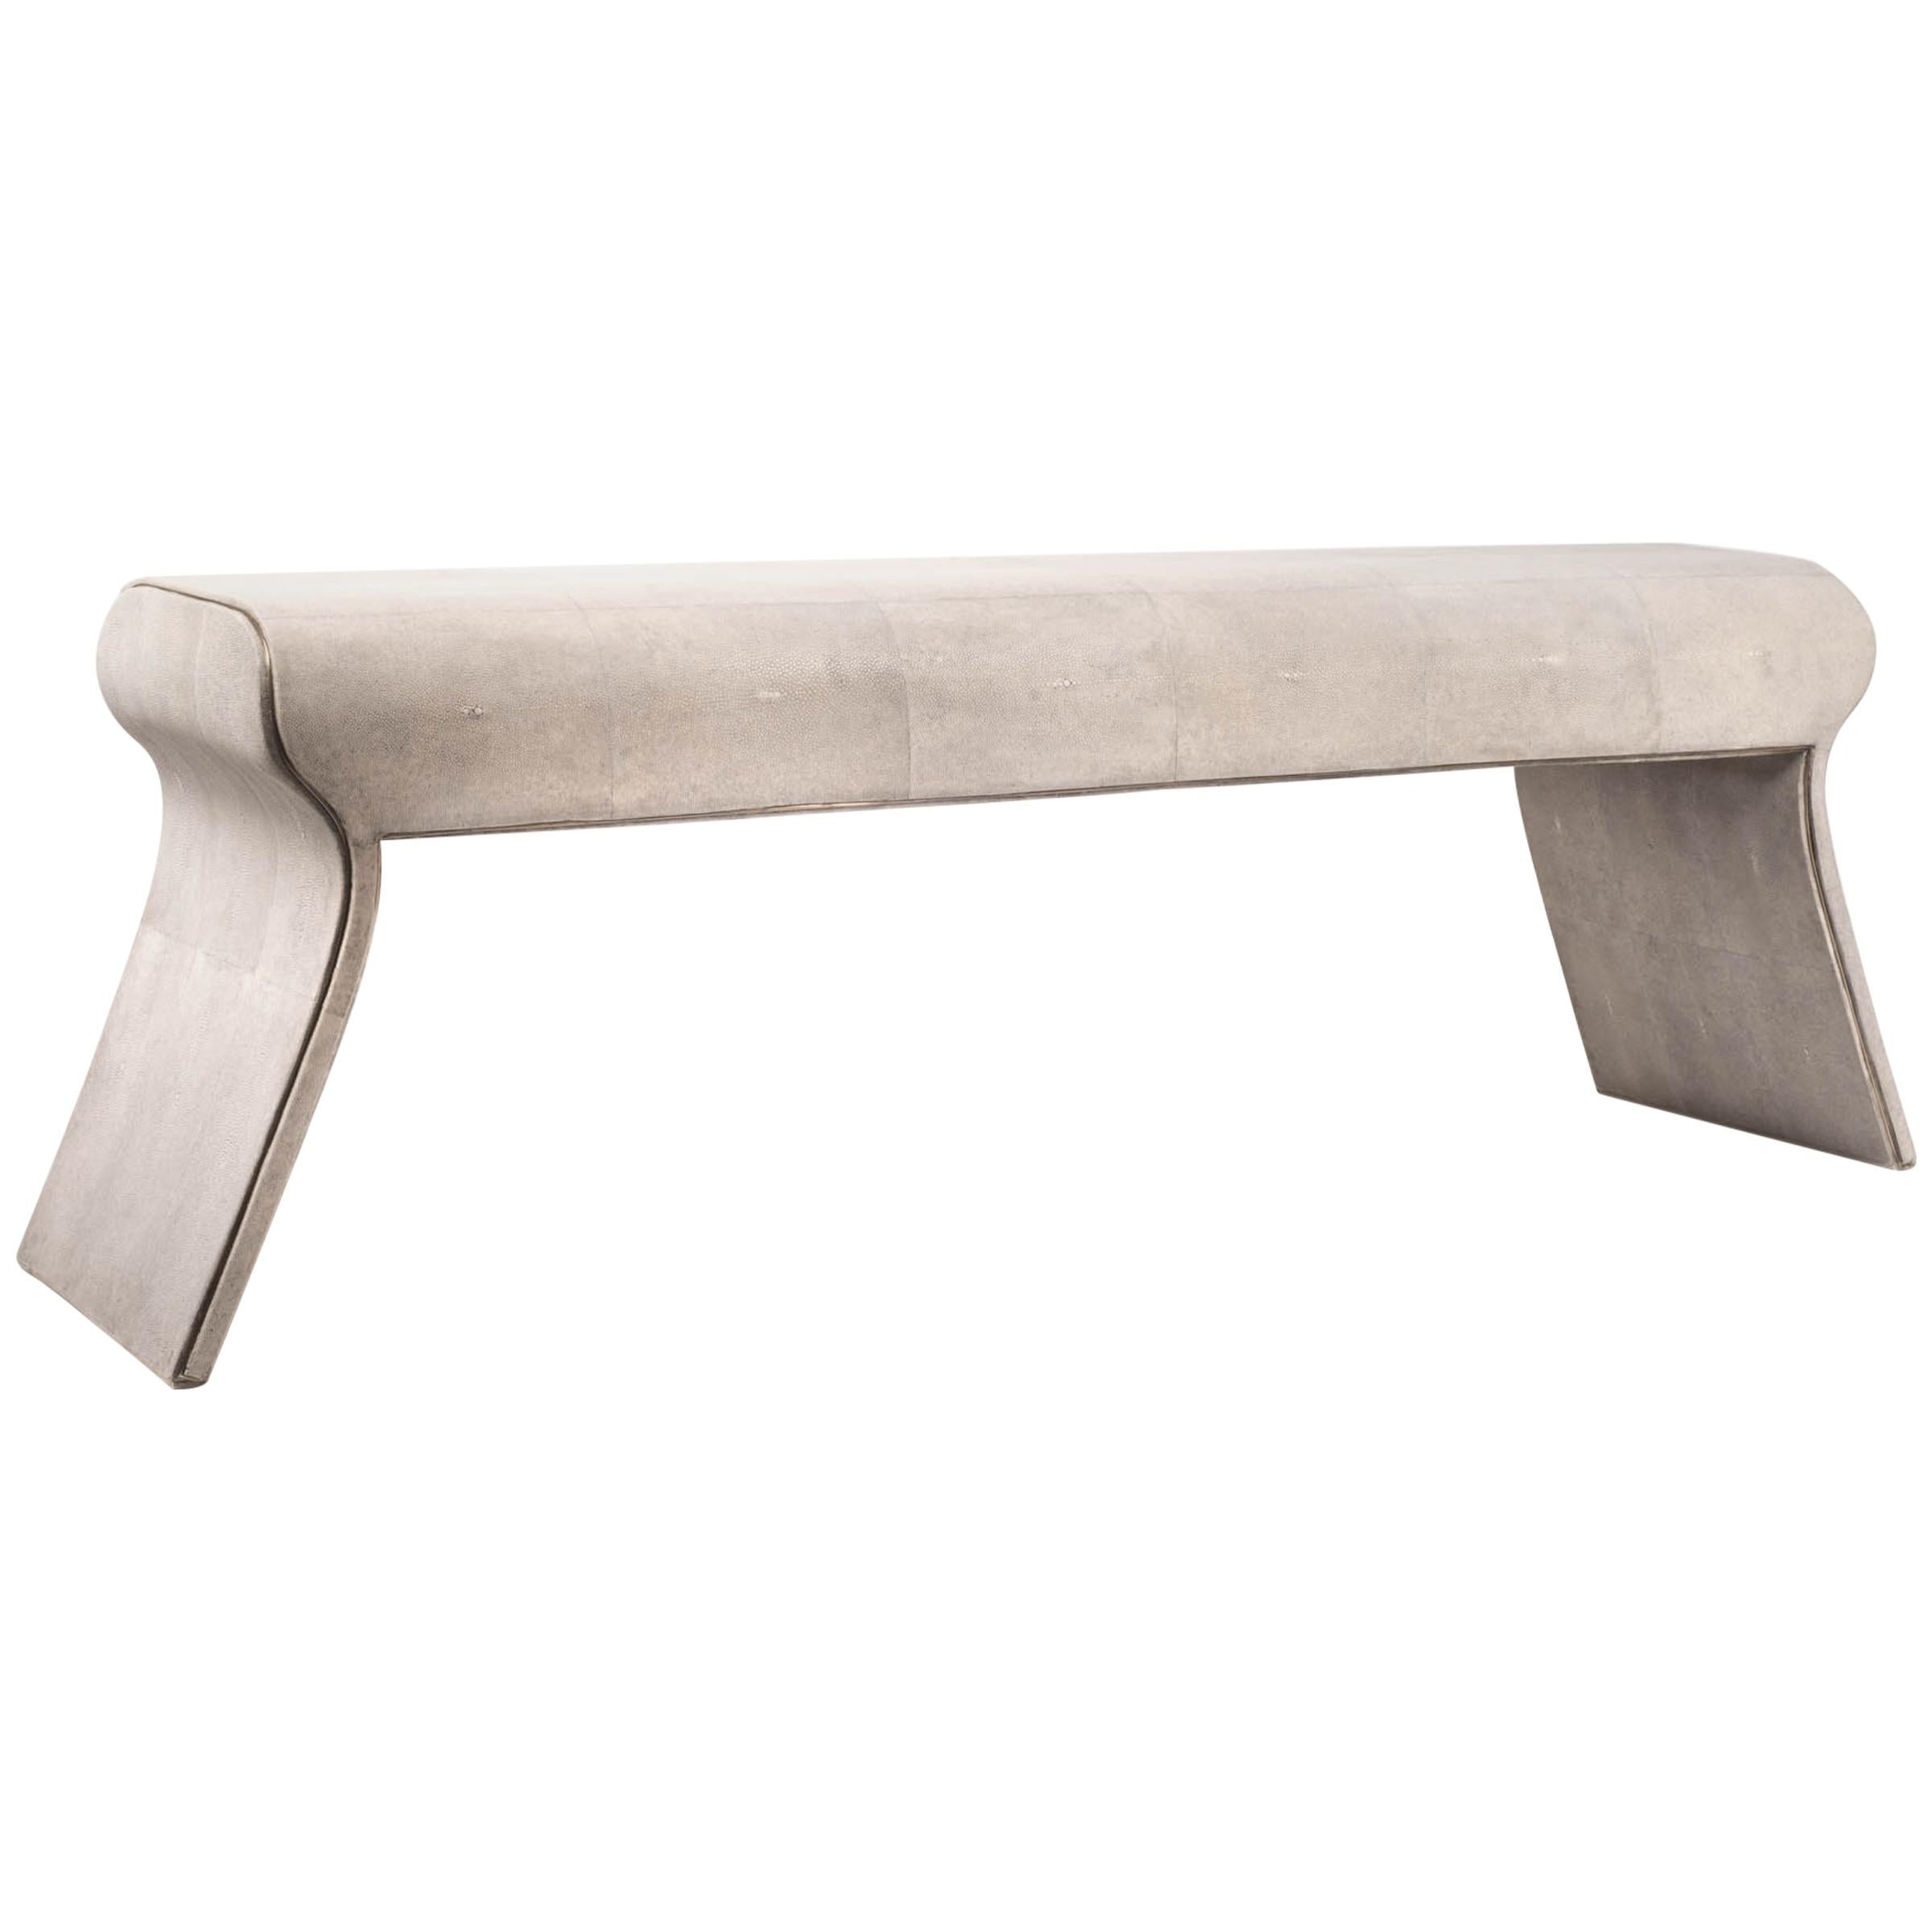 Art Deco Dandy Day Bench in Shagreen with Bronze-Patina Brass Accents by Kifu Paris For Sale